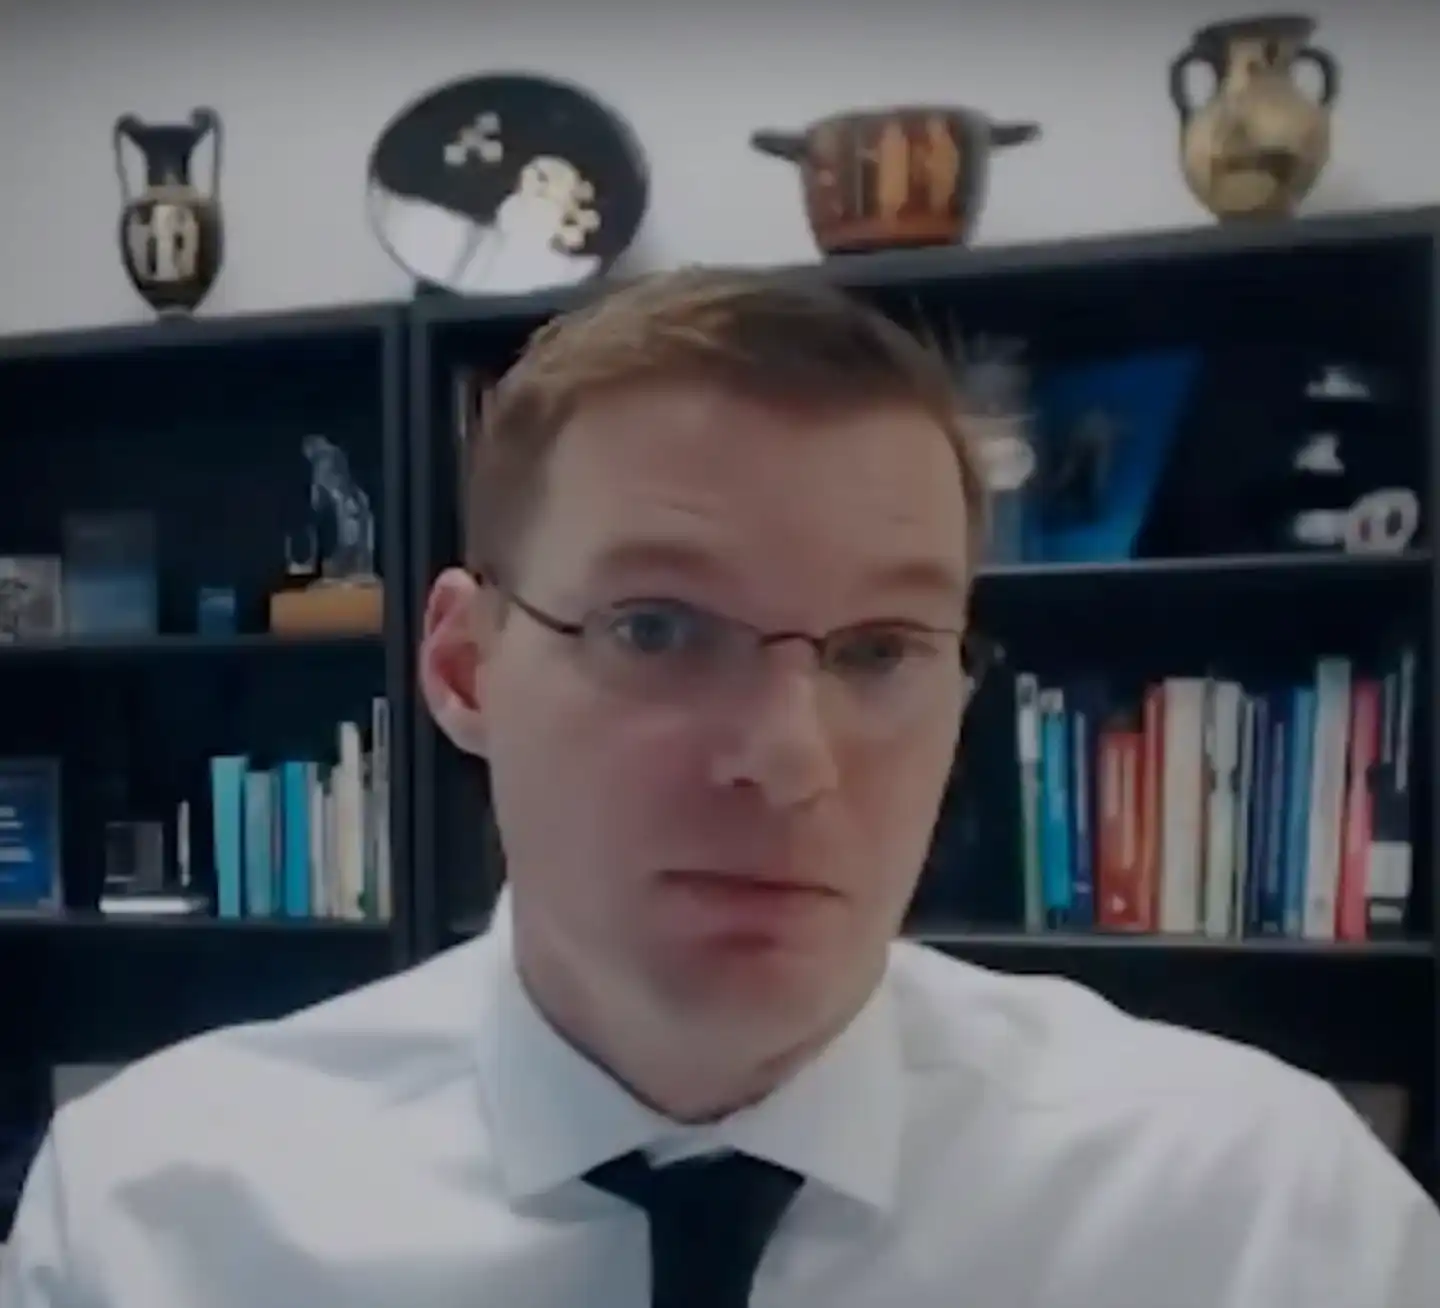 Dr. Jason Kamras at his desk with books behind him